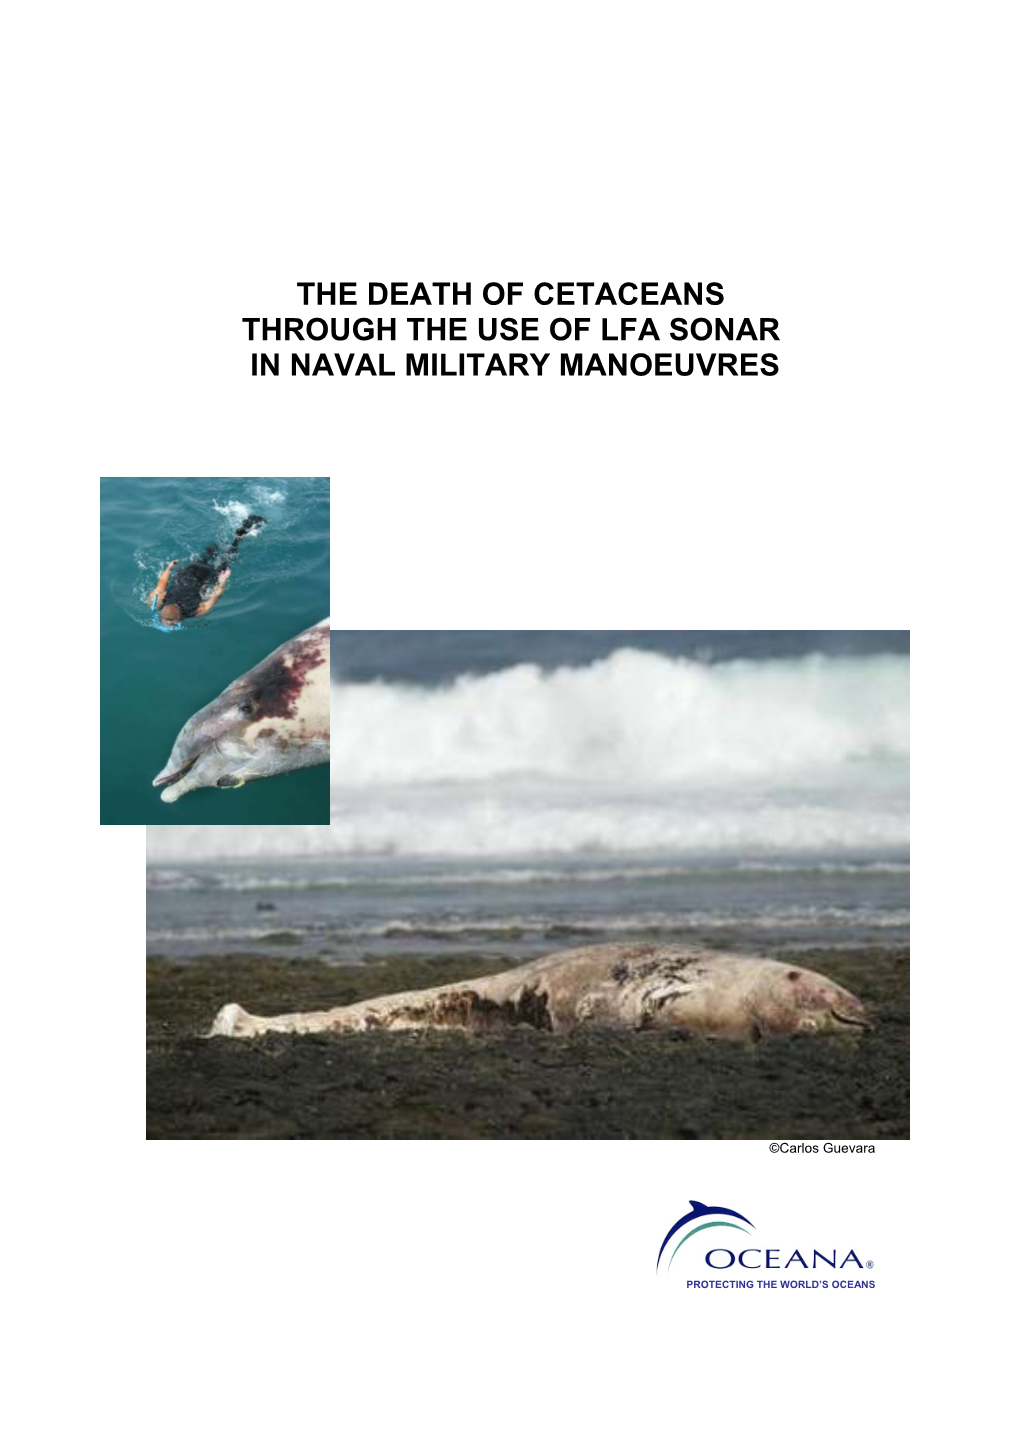 The Death of Cetaceans Through the Use of Lfa Sonar in Naval Military Manoeuvres